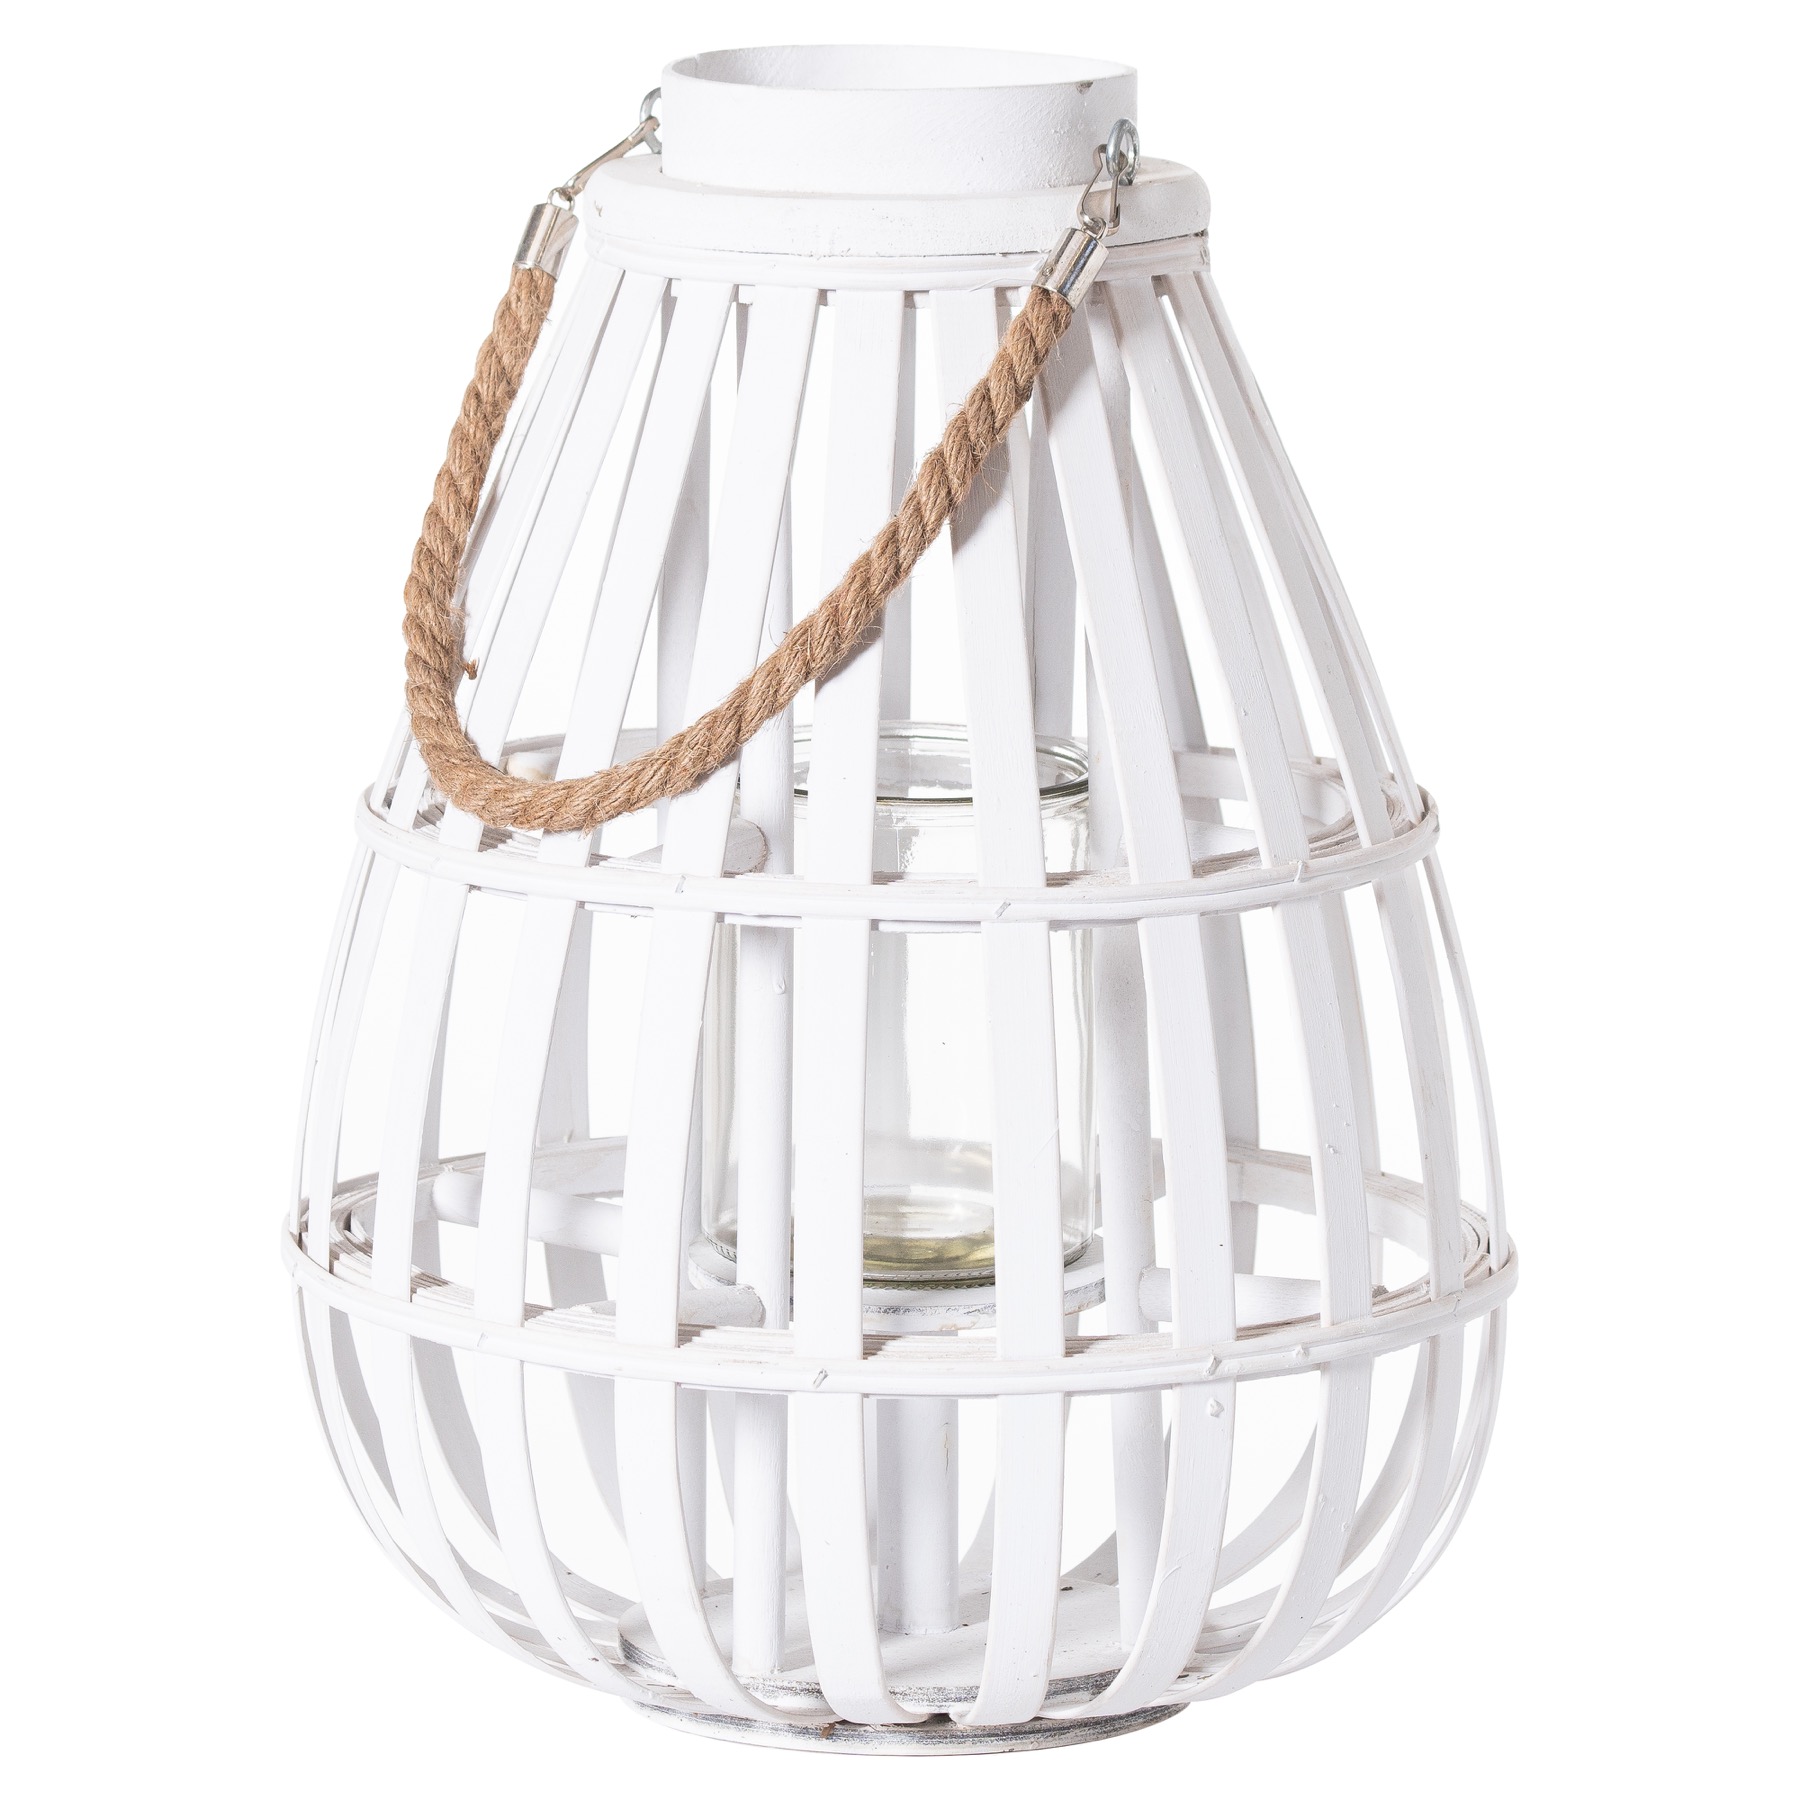 White Domed Wicker Lantern With Rope Detail - Image 1